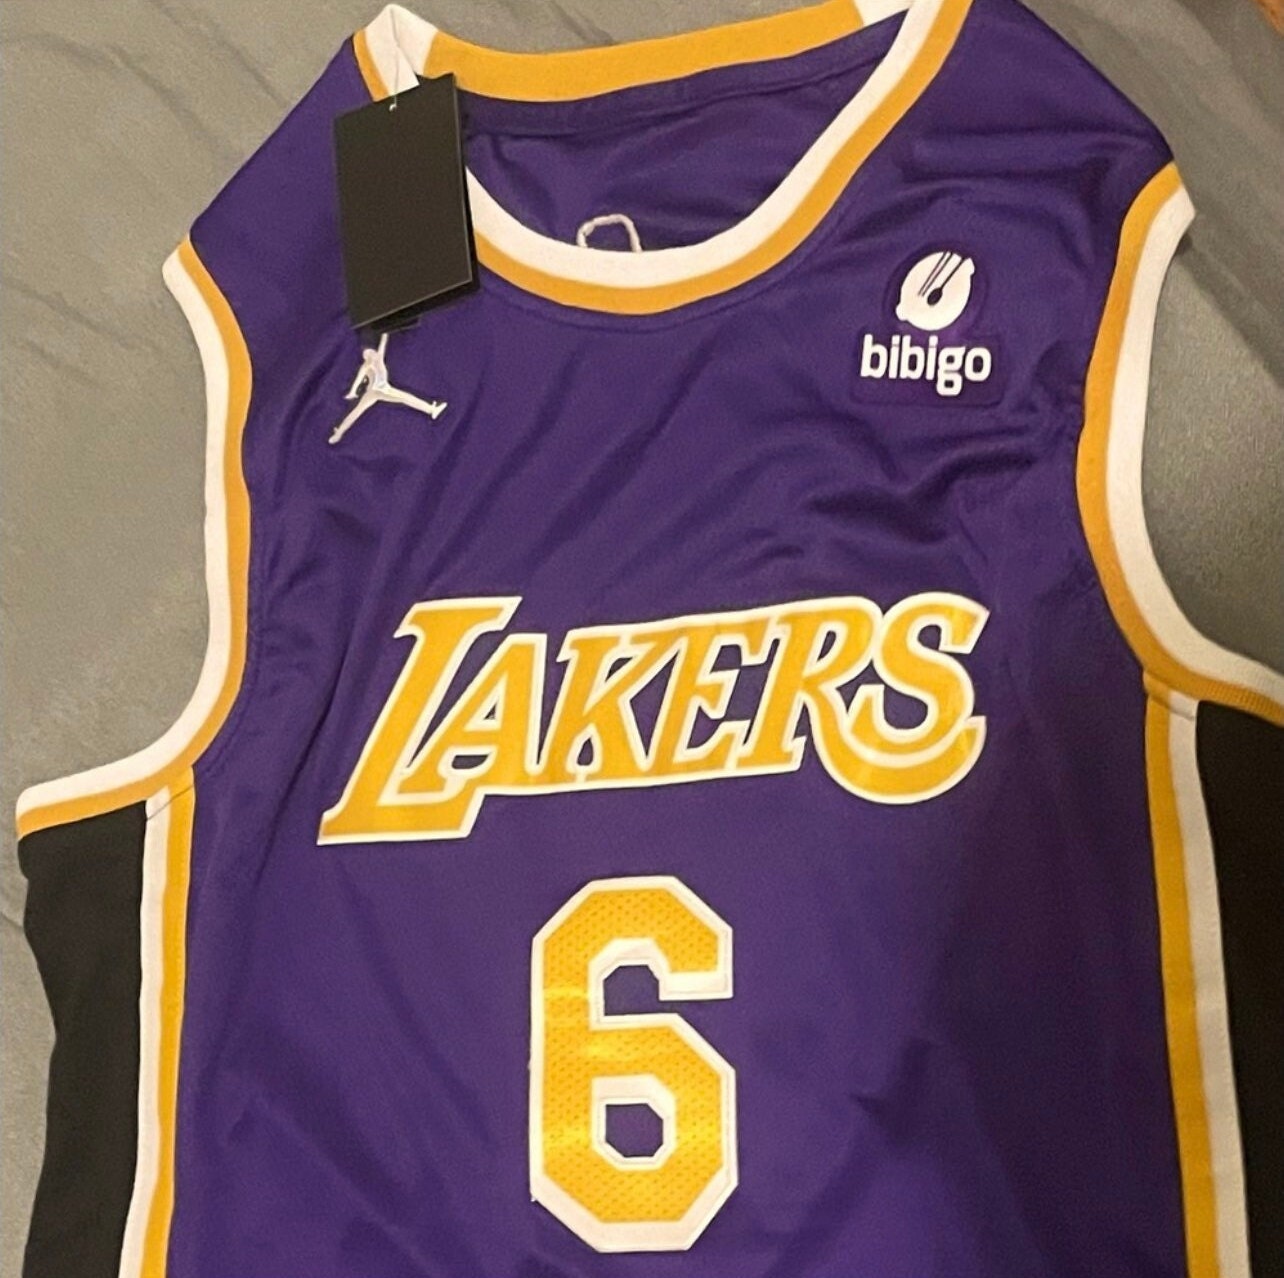 Lebron James jersey vintage 75 greatest players edition